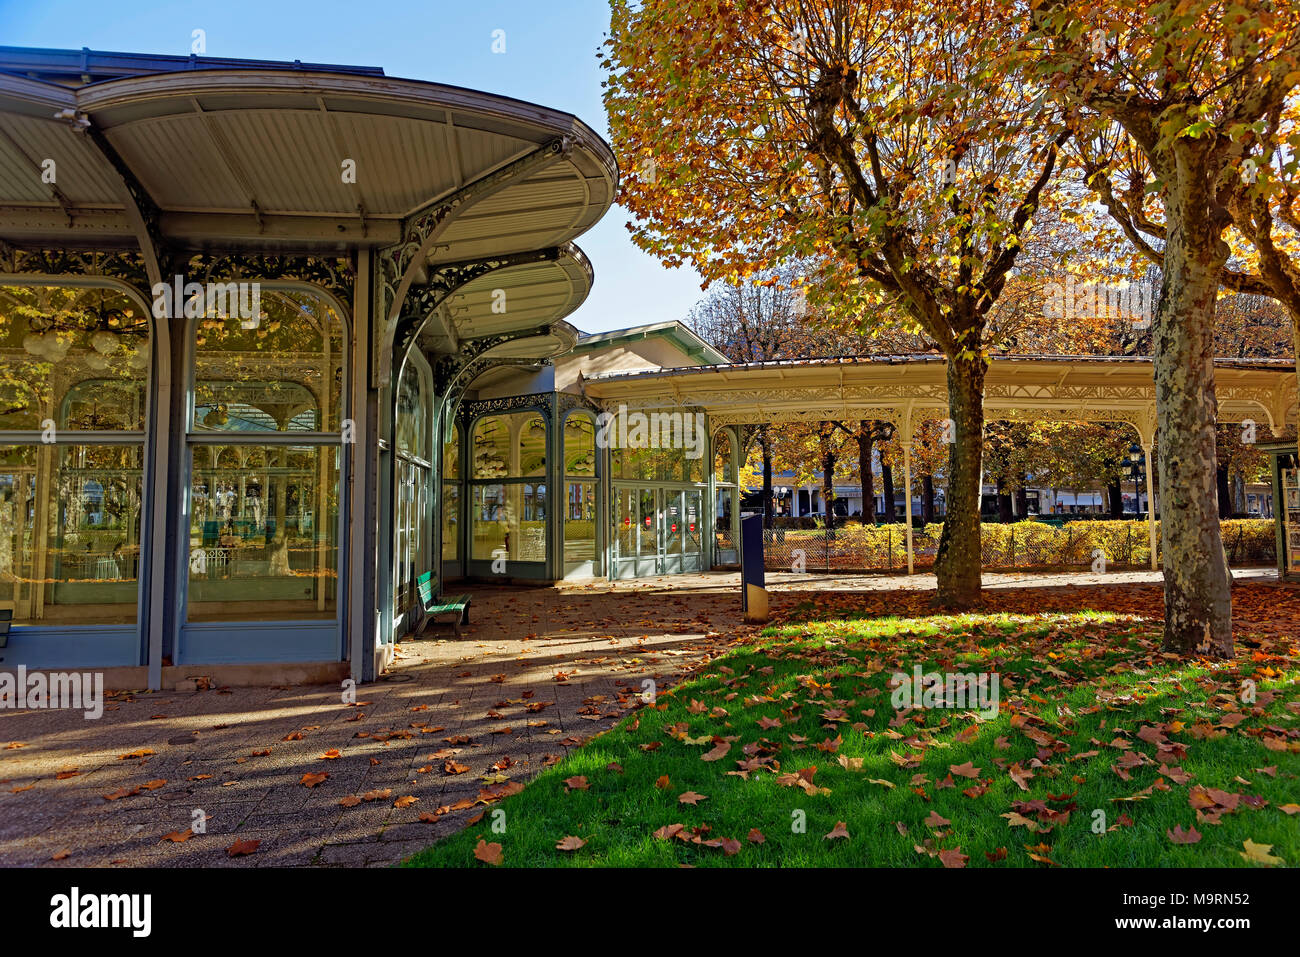 Europe, France, Auvergne, Vichy, avenue Thermale, gallery of the Sources, pump room of the springs, colonnade, autumn, colour of the leaves, building, Stock Photo